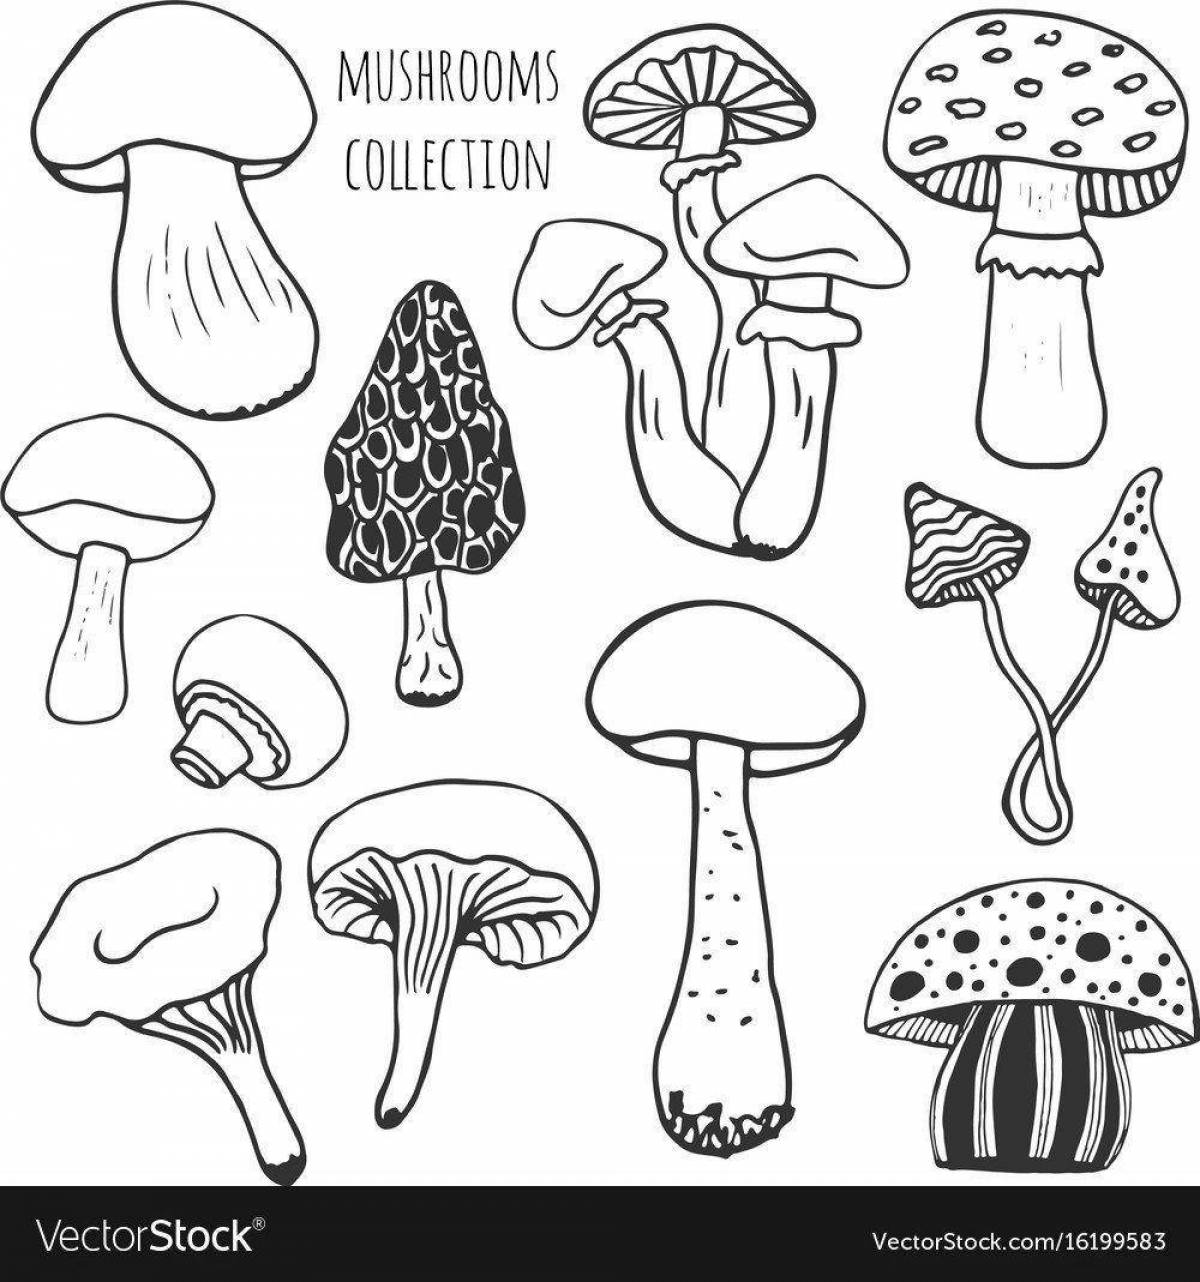 Coloring book bold poisonous mushrooms